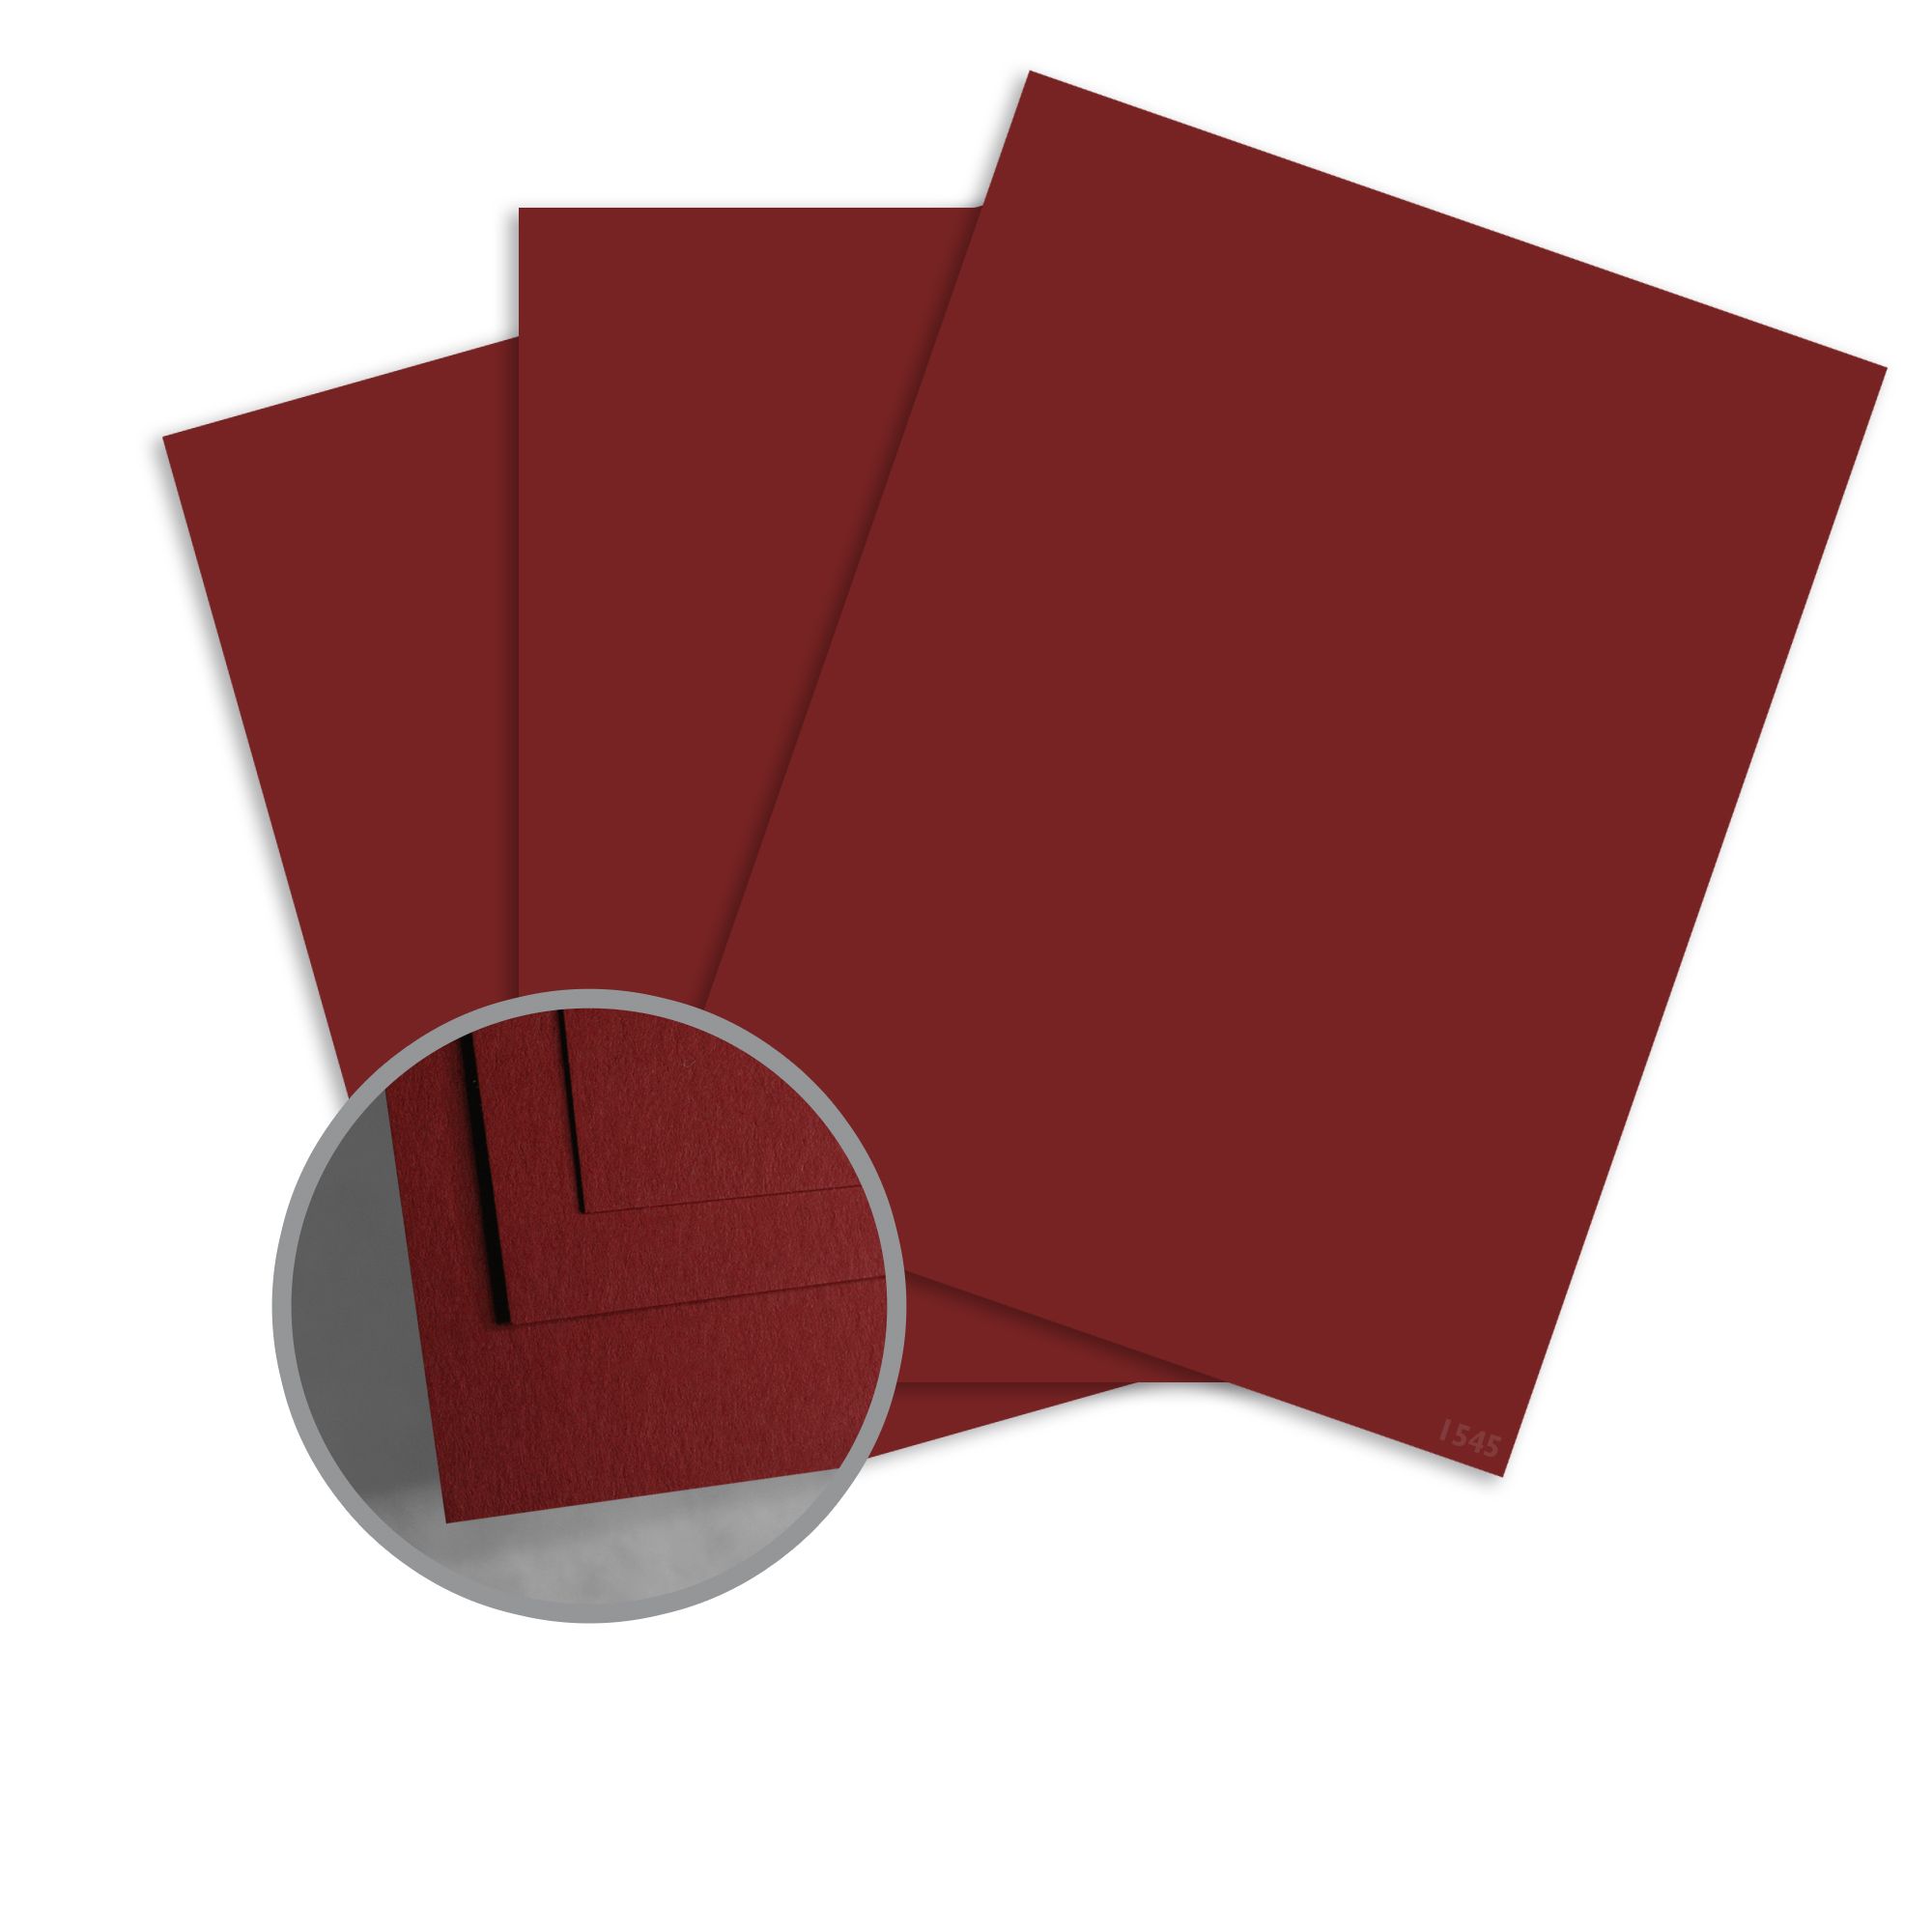 12 x 12 inch PREMIUM 100 LB PAVER RED//WINE//BURGUNDY Cardstock Paper COVER from 25 Sheets from Cardstock Warehouse